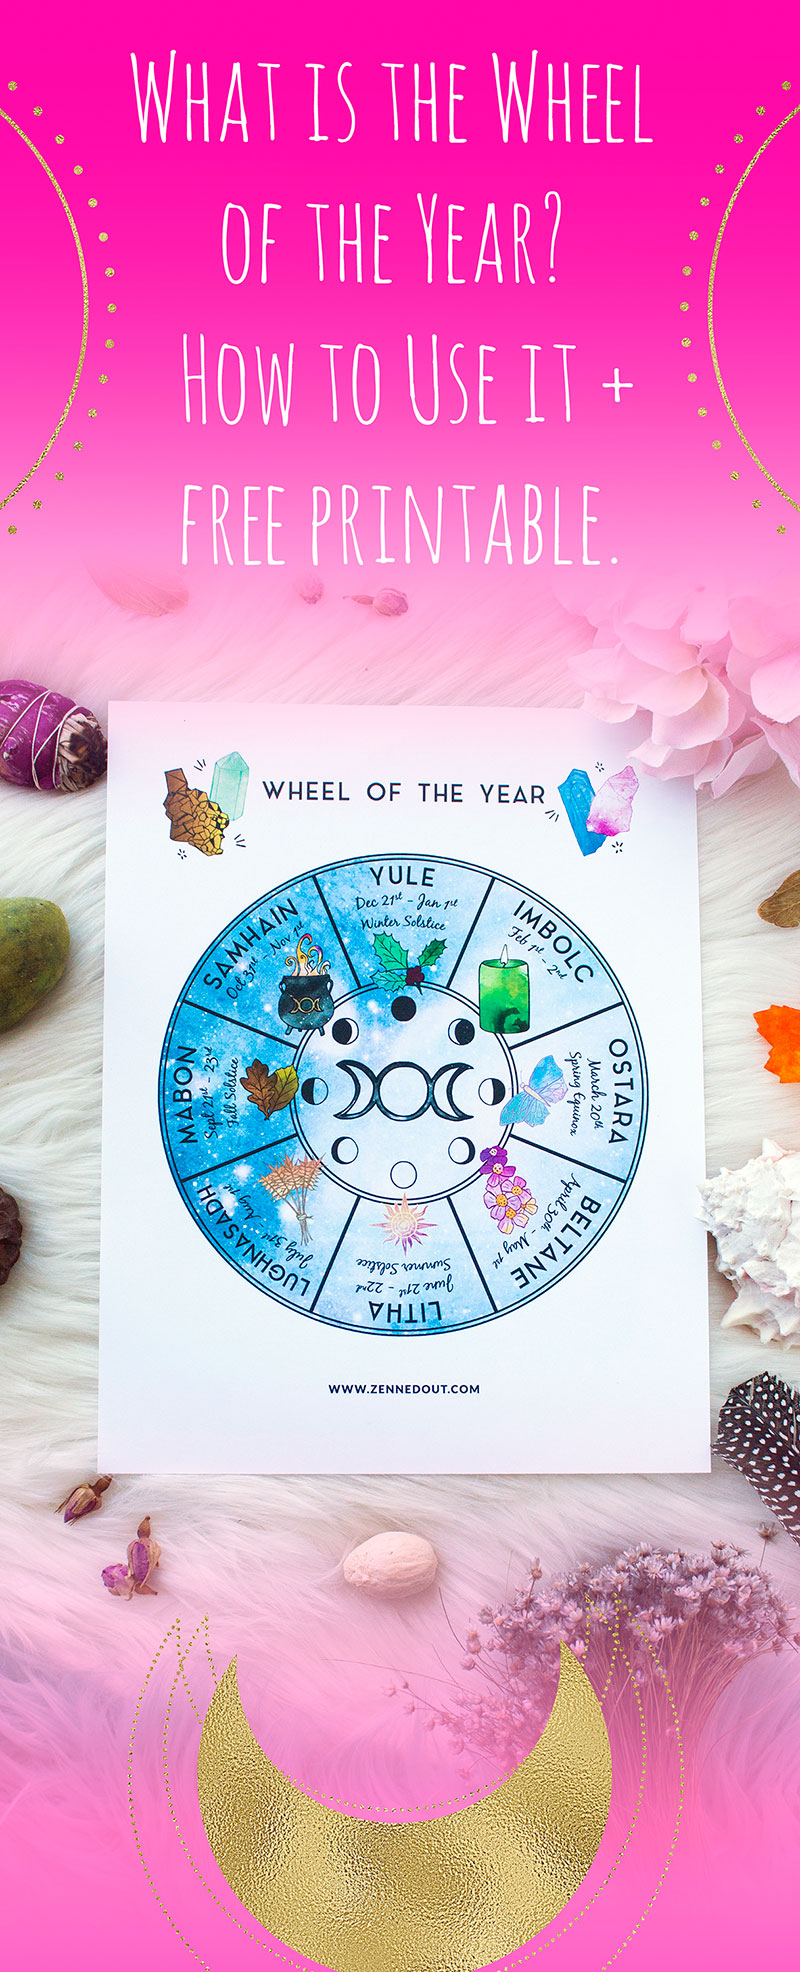 What Is The Wheel Of The Year &amp; How To Use It // With Free